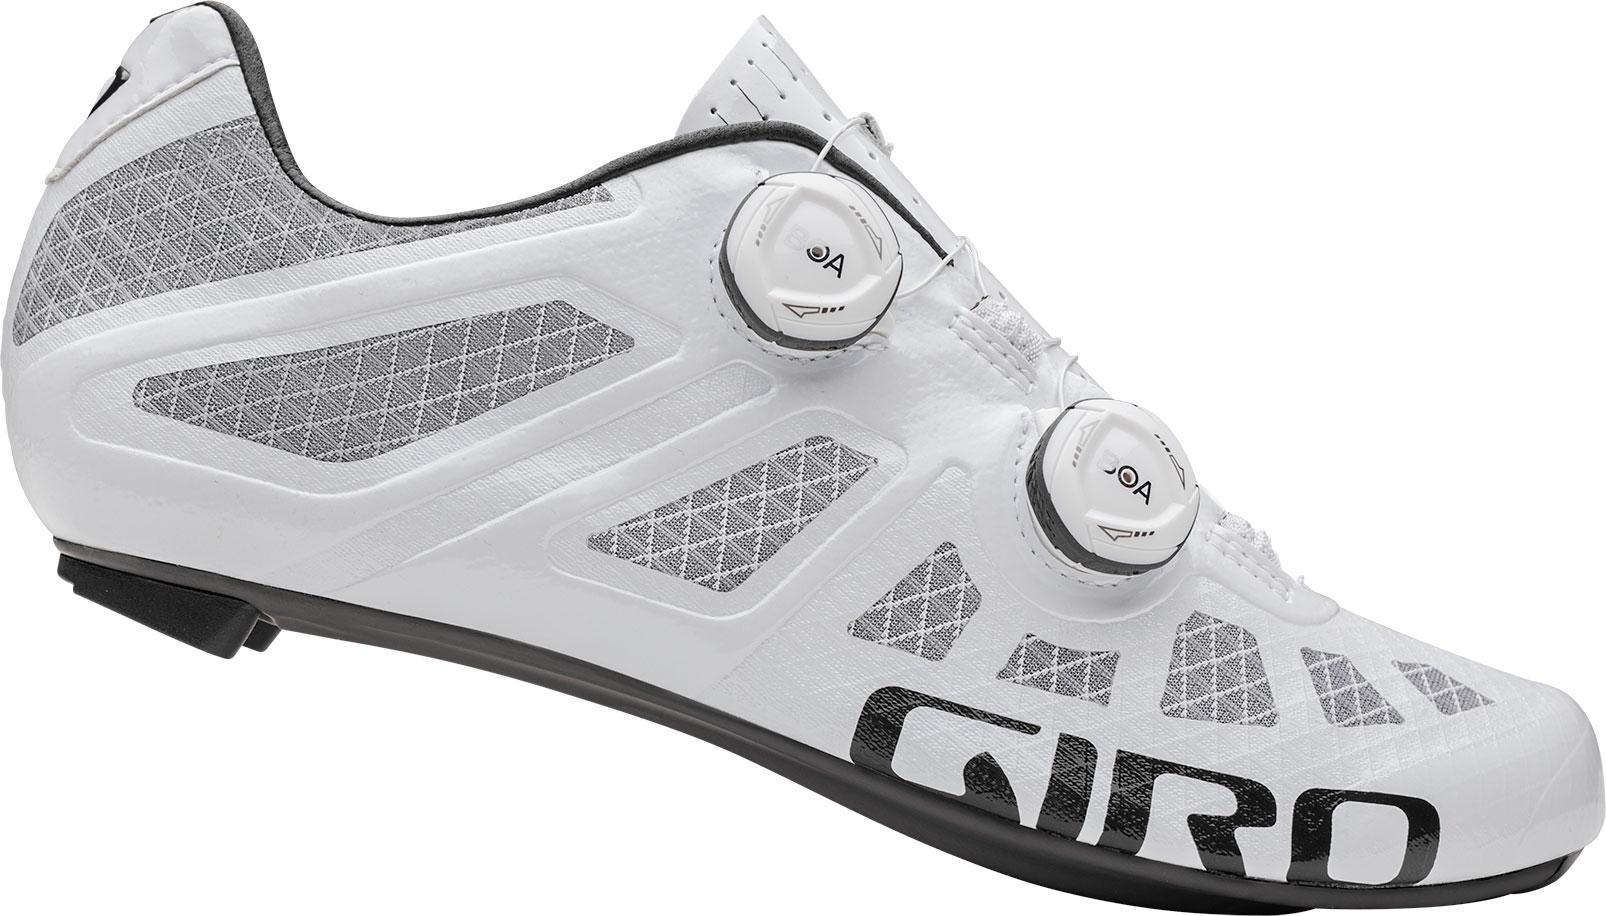 Giro Imperial Road Cycling Shoes - White